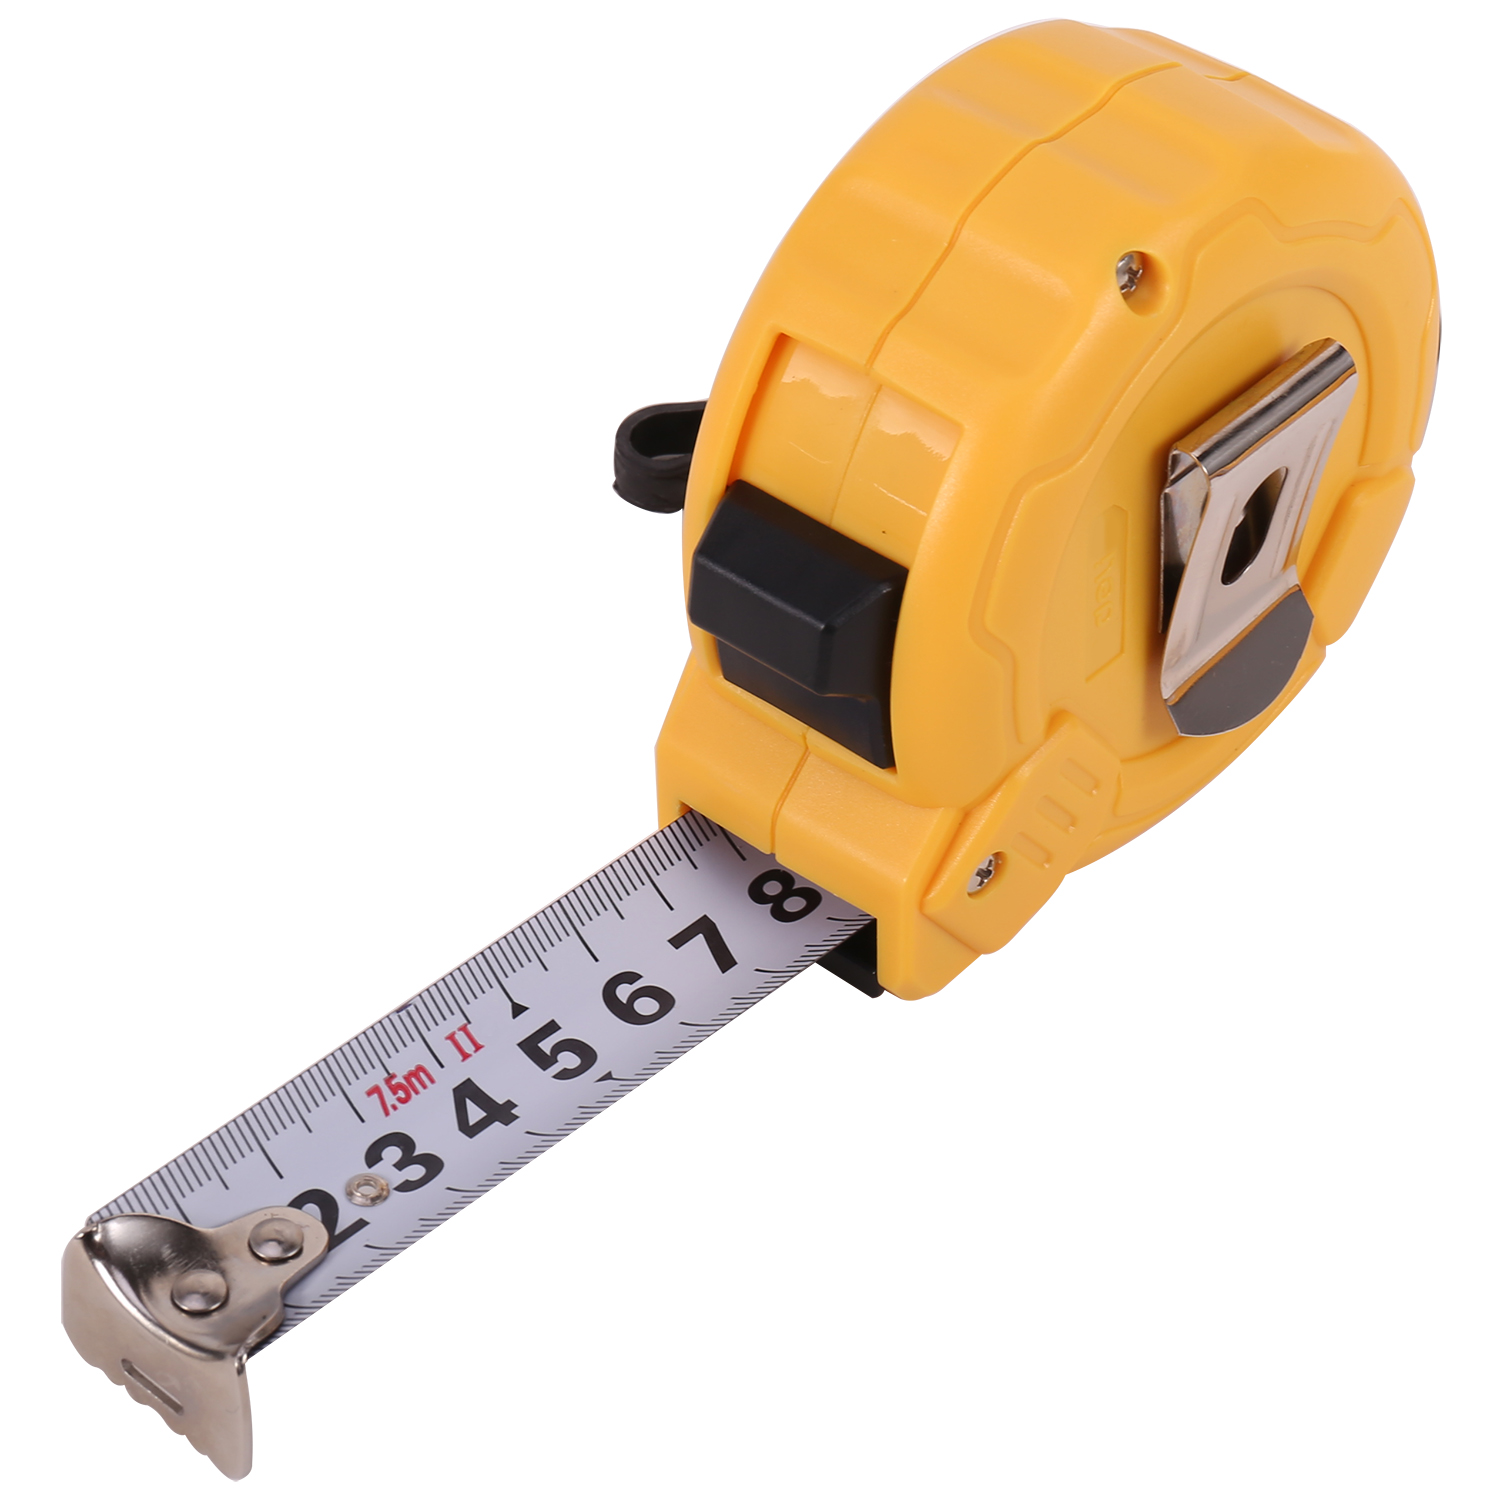 Flexible steel Measuring Tape for Construction